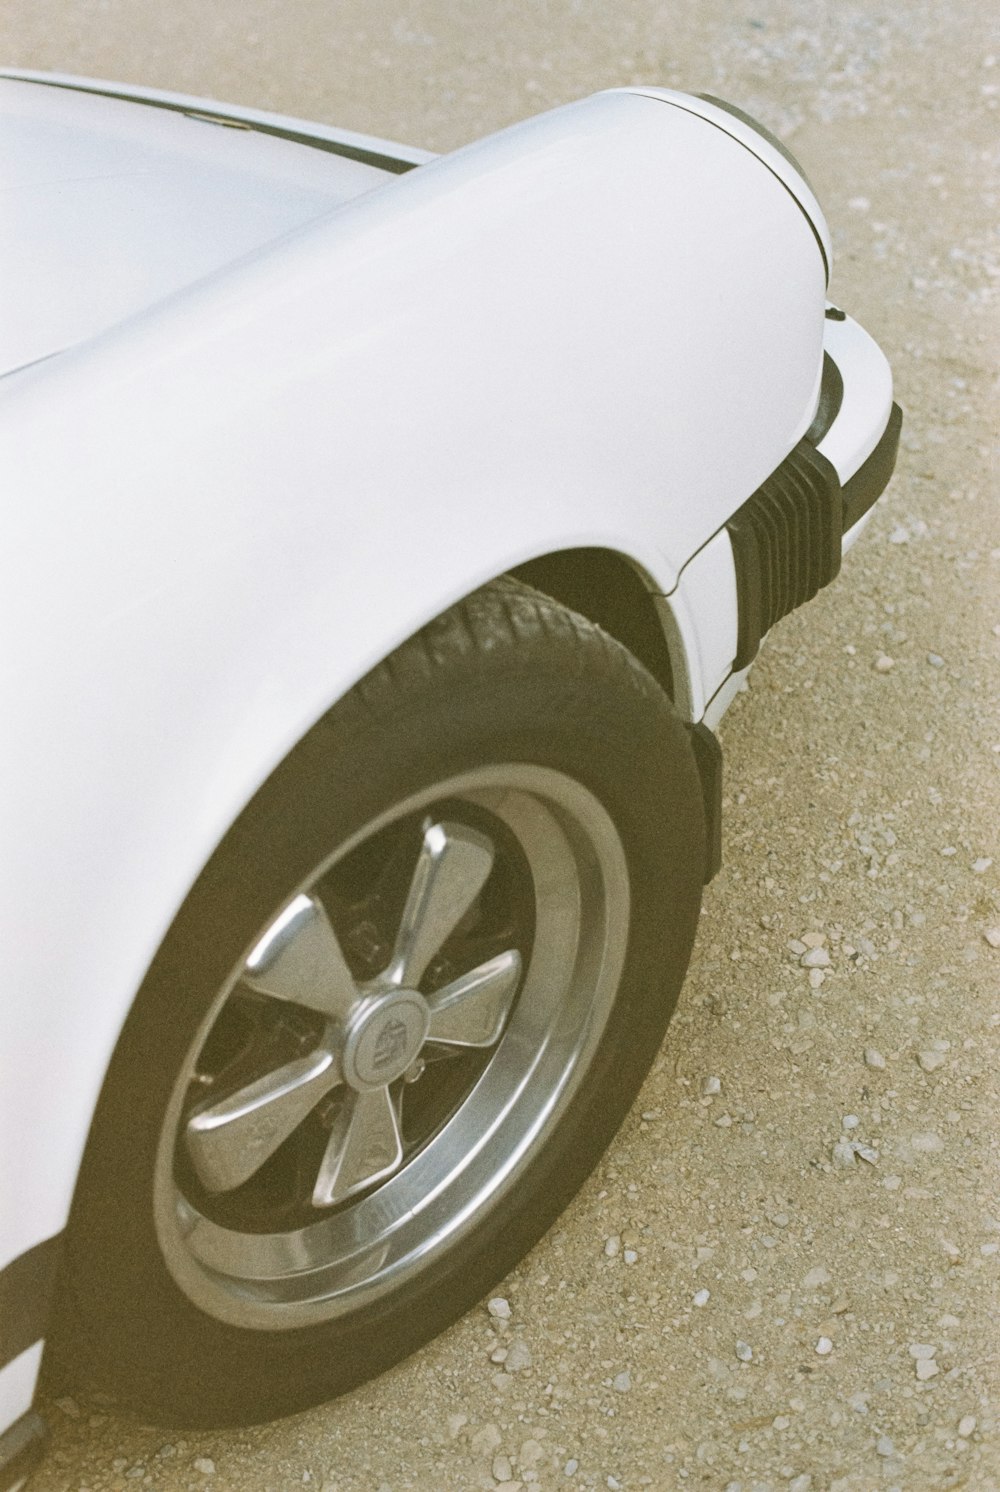 a close up of a white car on a street